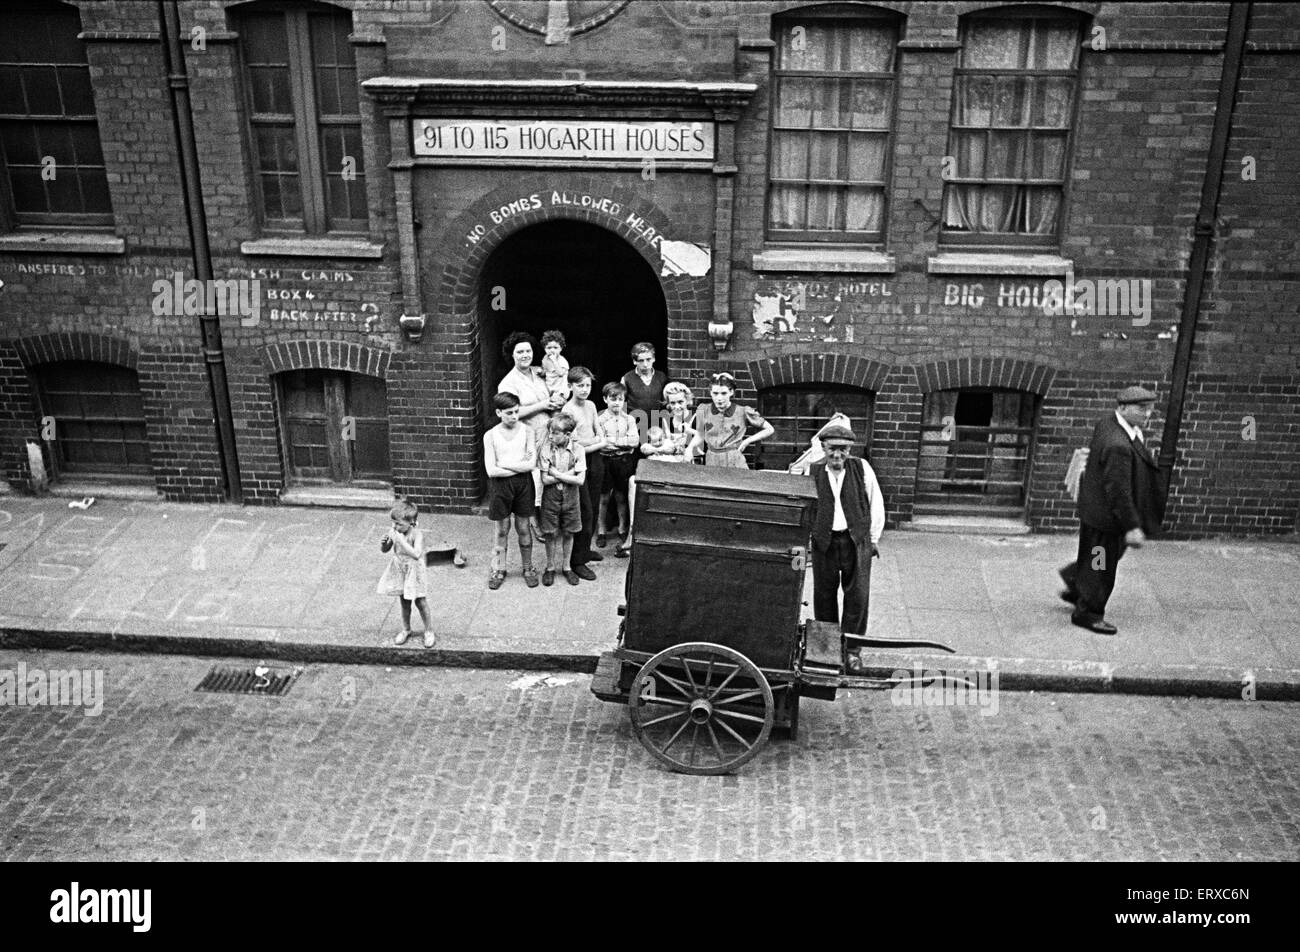 The residents of Hogarth Houses in Whitechapel, East London, watching a barrel organ player.  Circa 1947. Stock Photo